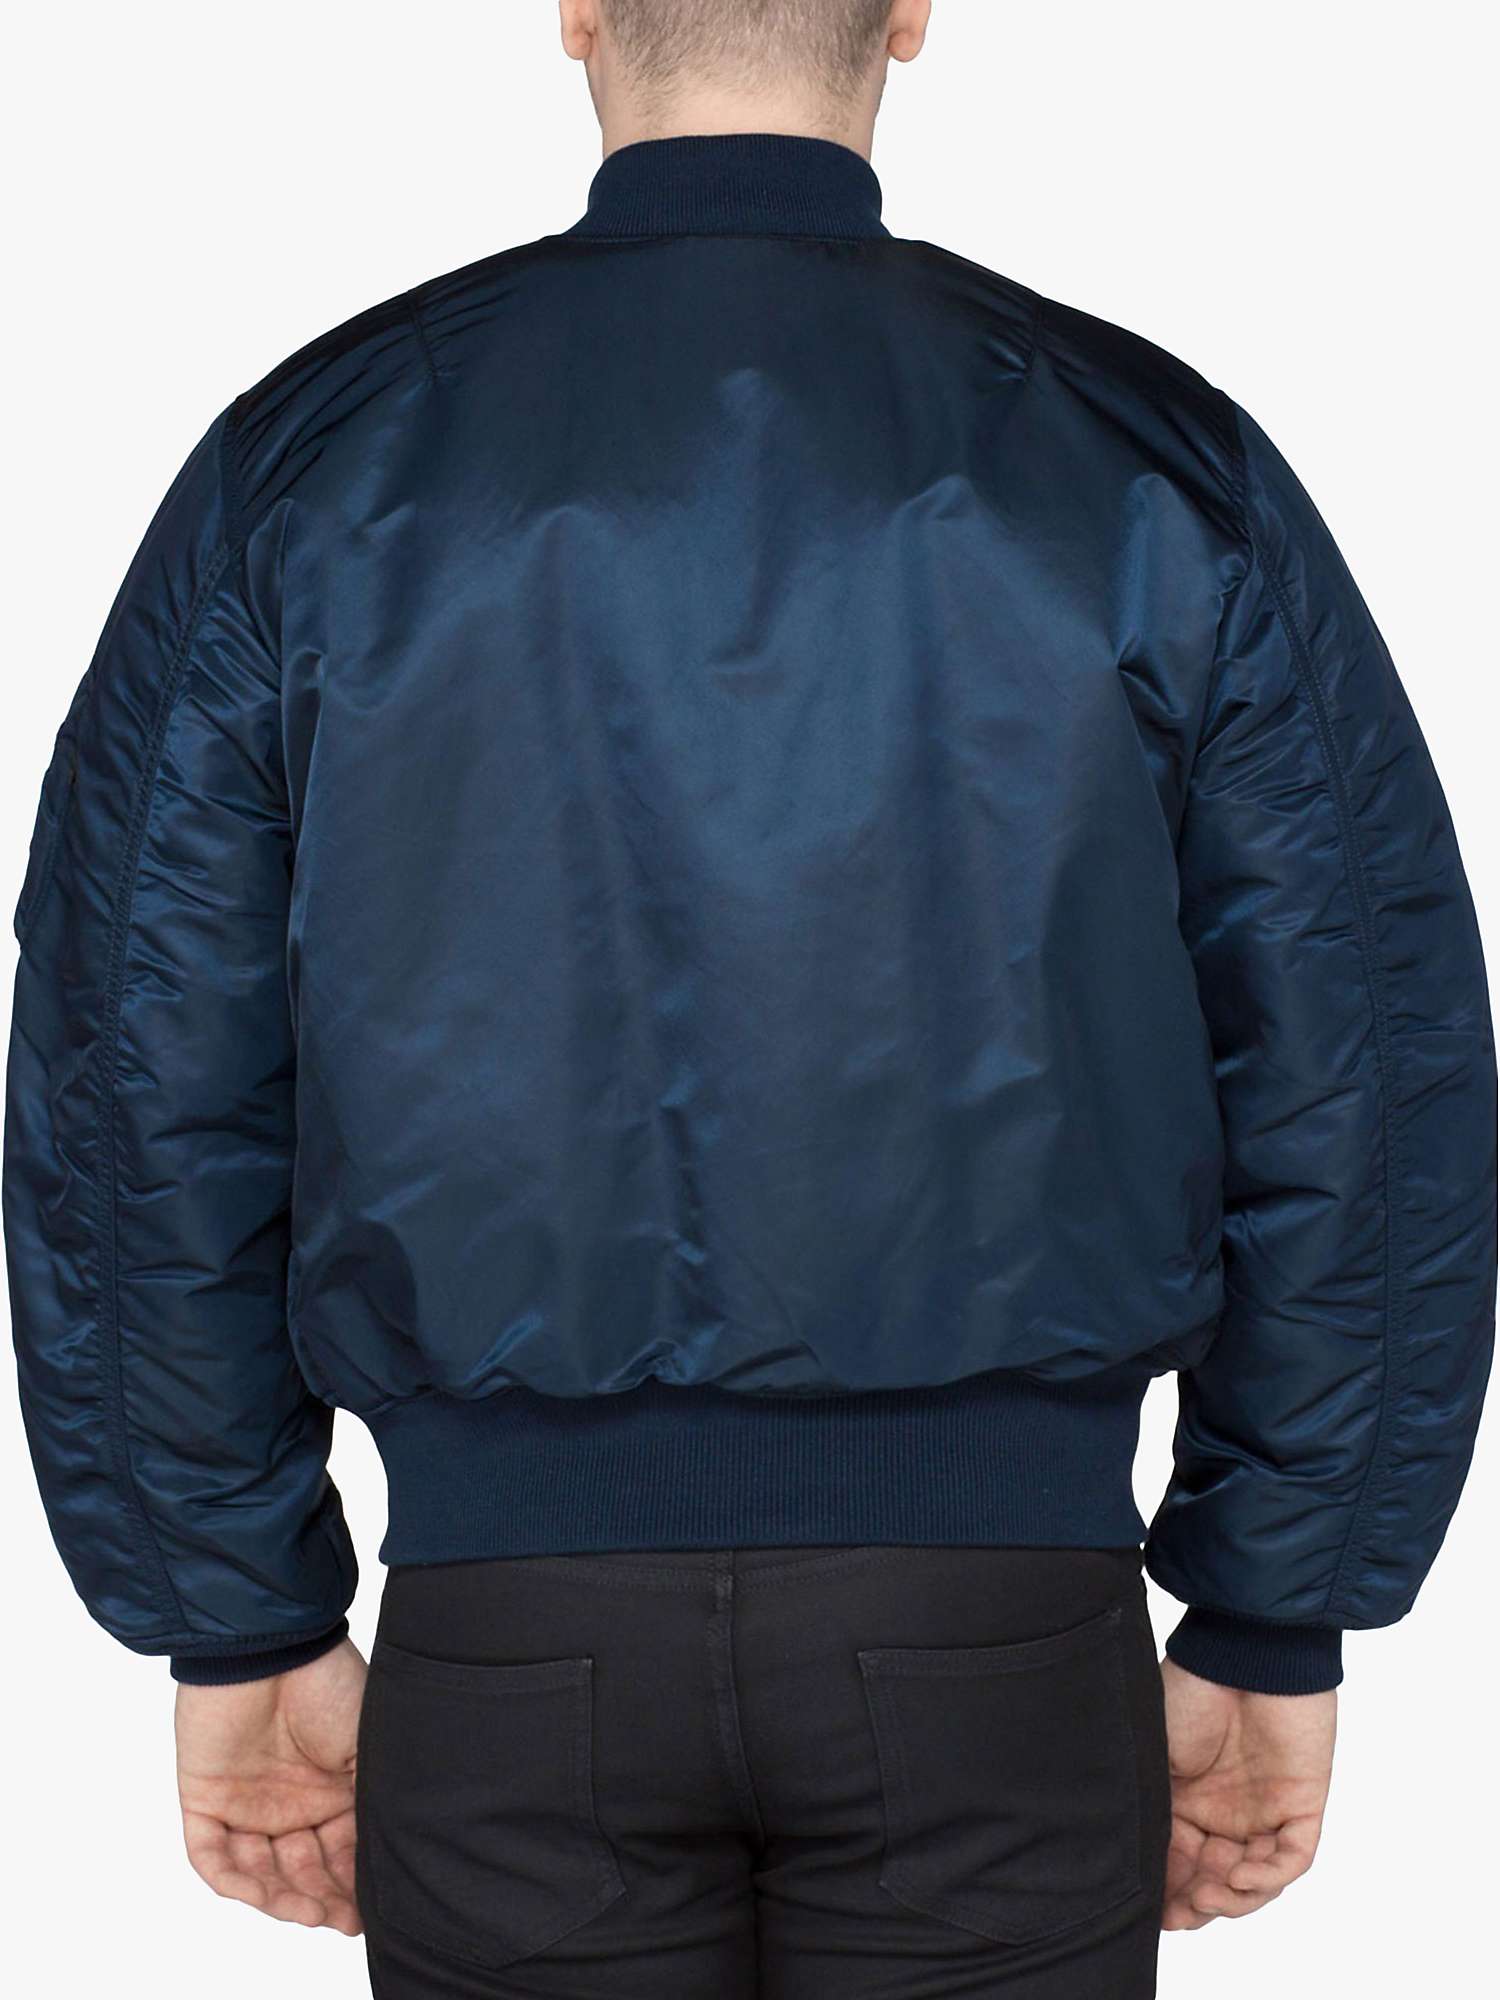 Alpha Industries MA1 Bomber Jacket, Rep Blue at John Lewis & Partners